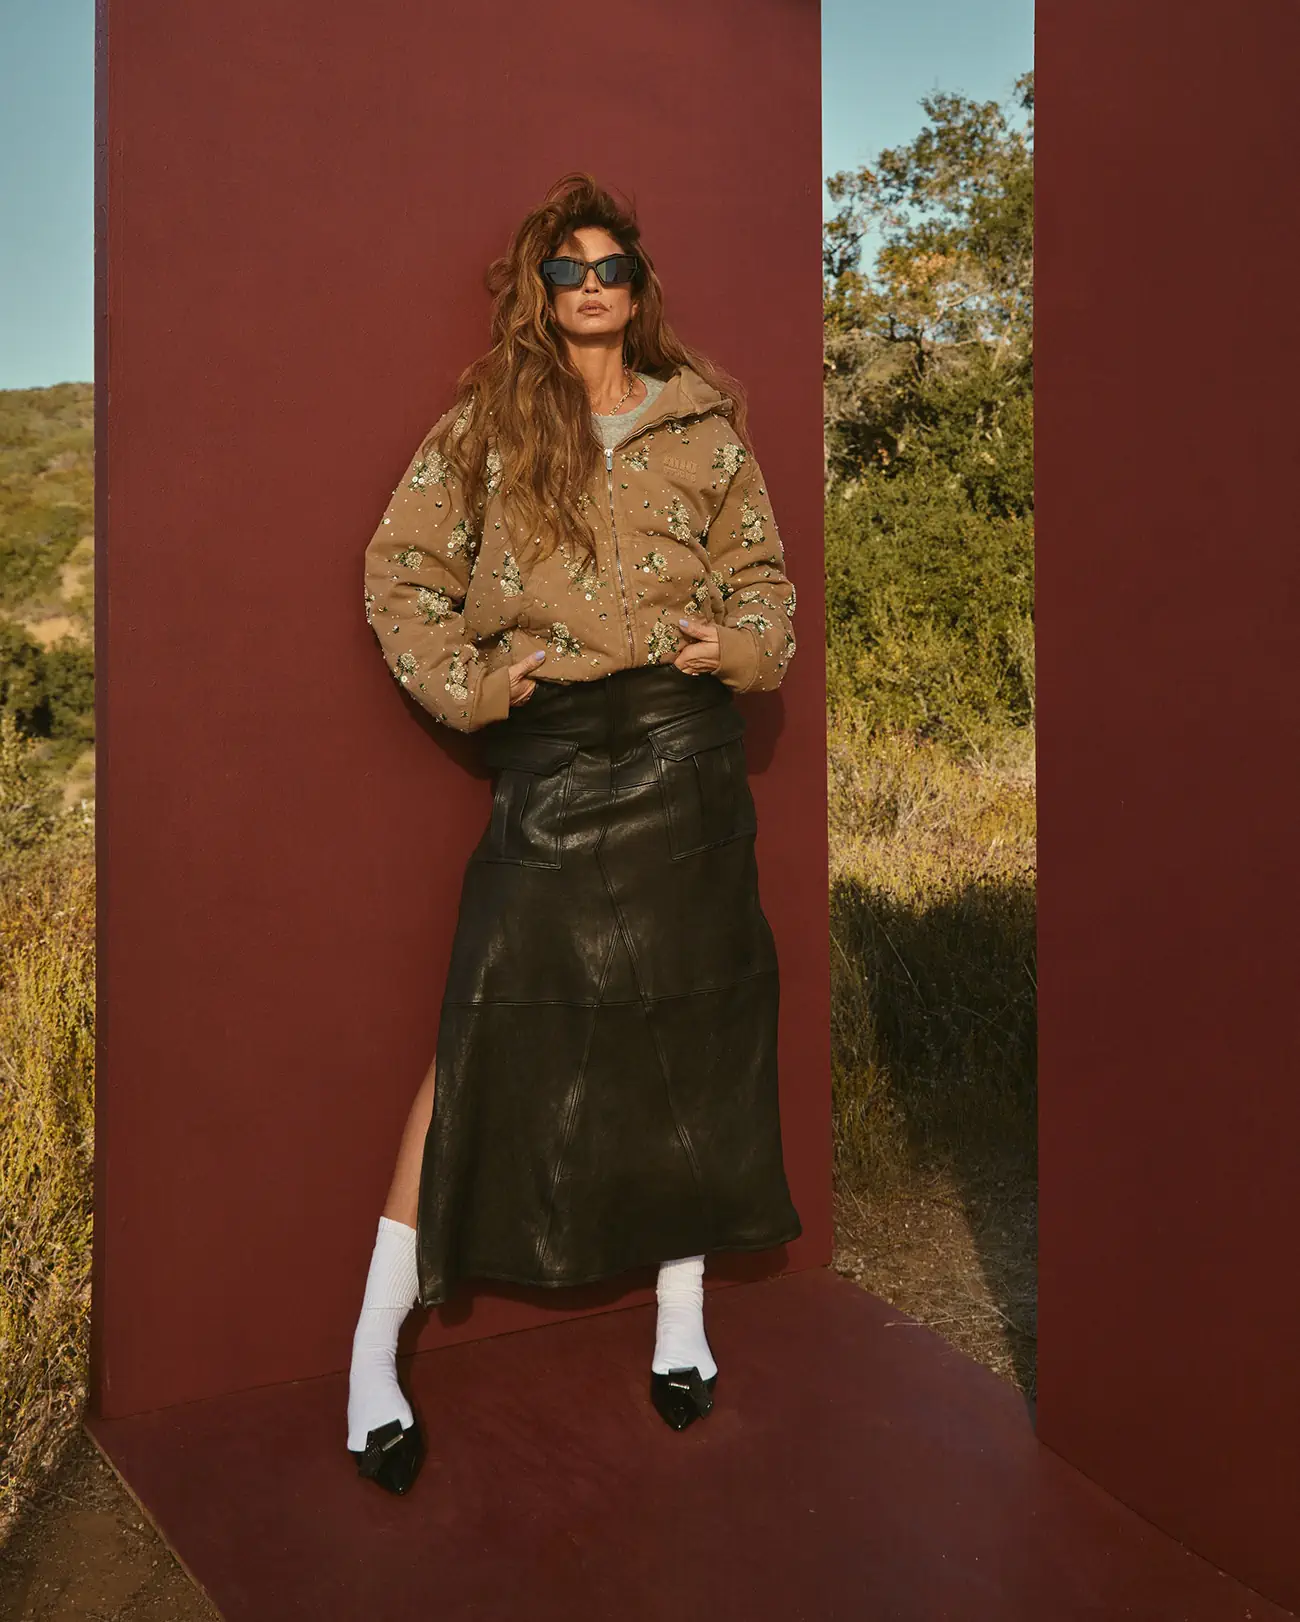 Cindy Crawford covers Flaunt Magazine Issue 190 by Greg Swales